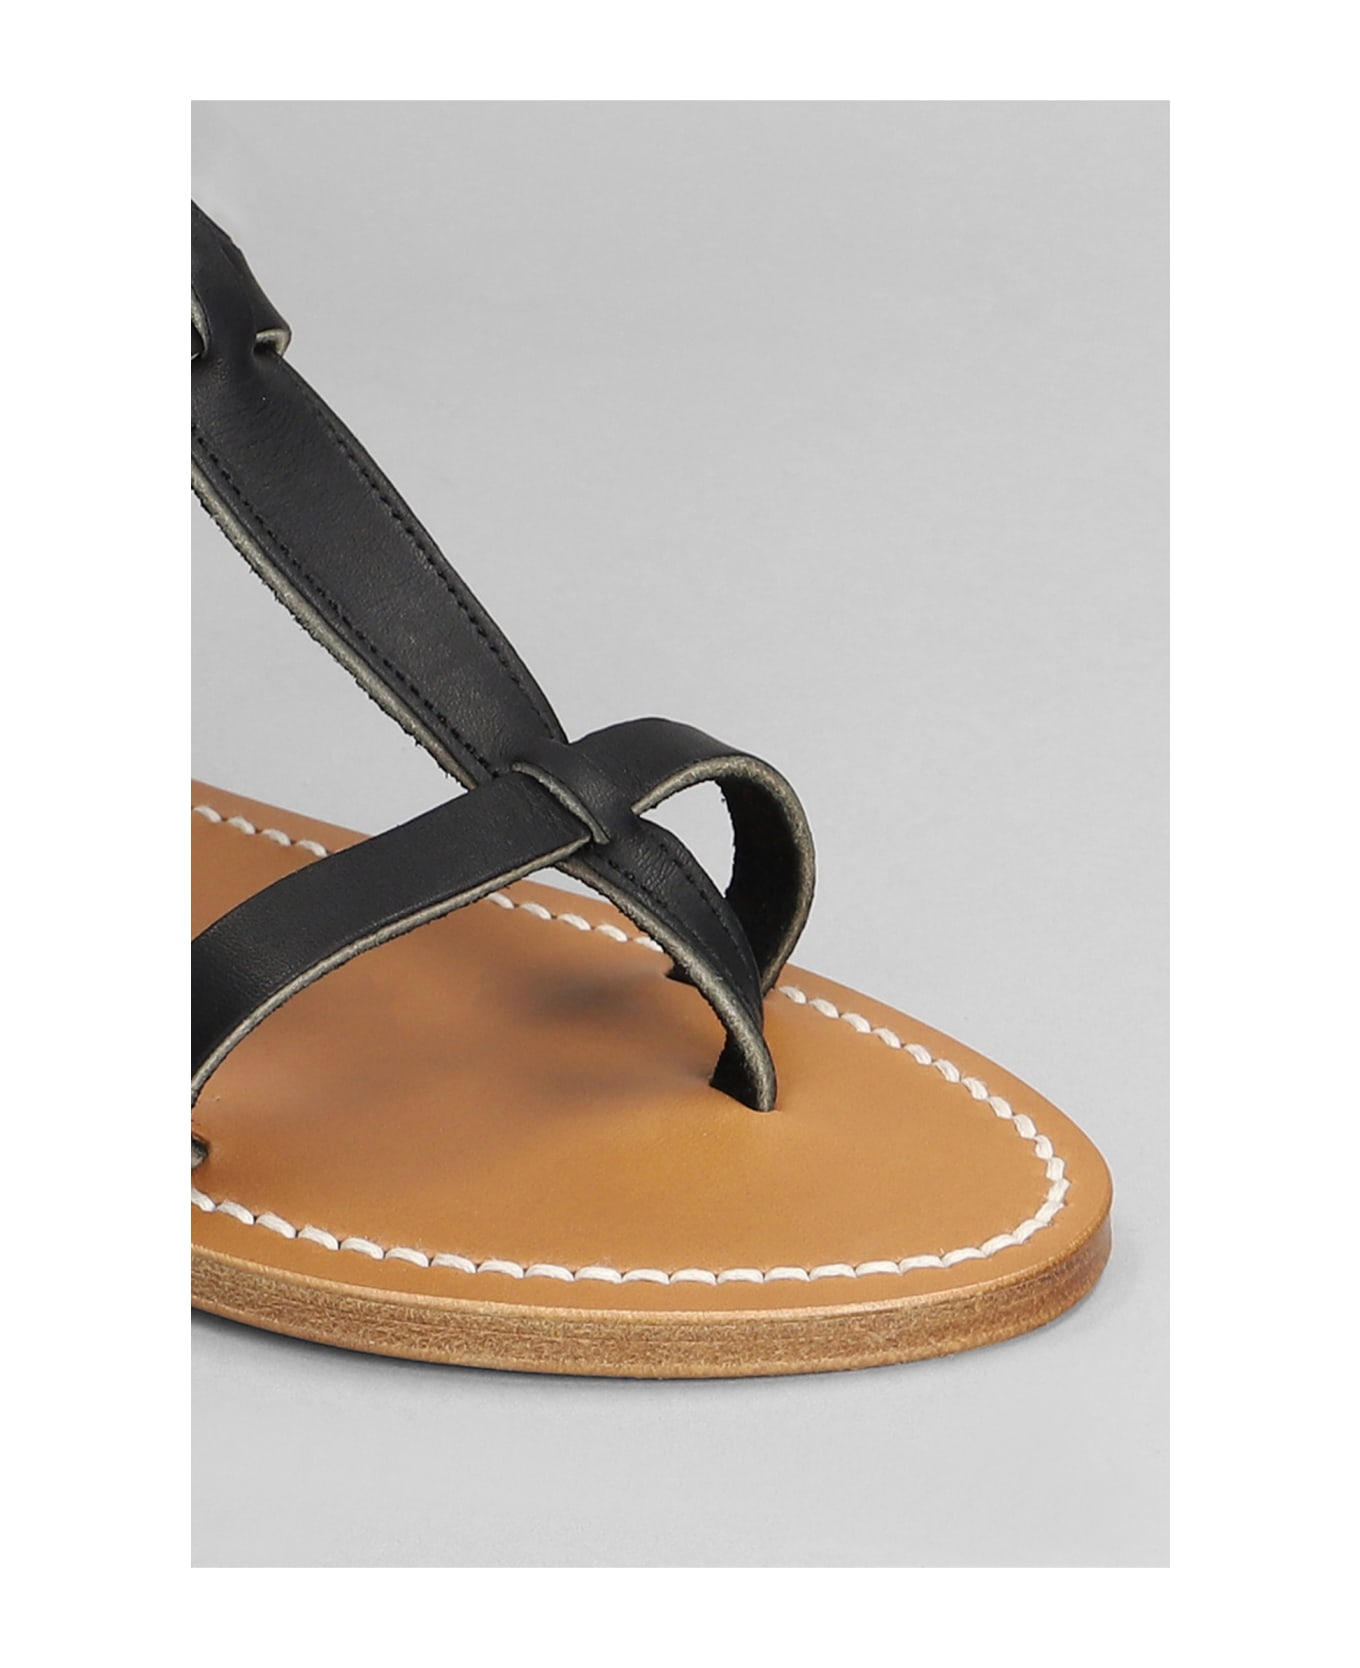 K.Jacques Forban F Flats In Black Leather - black